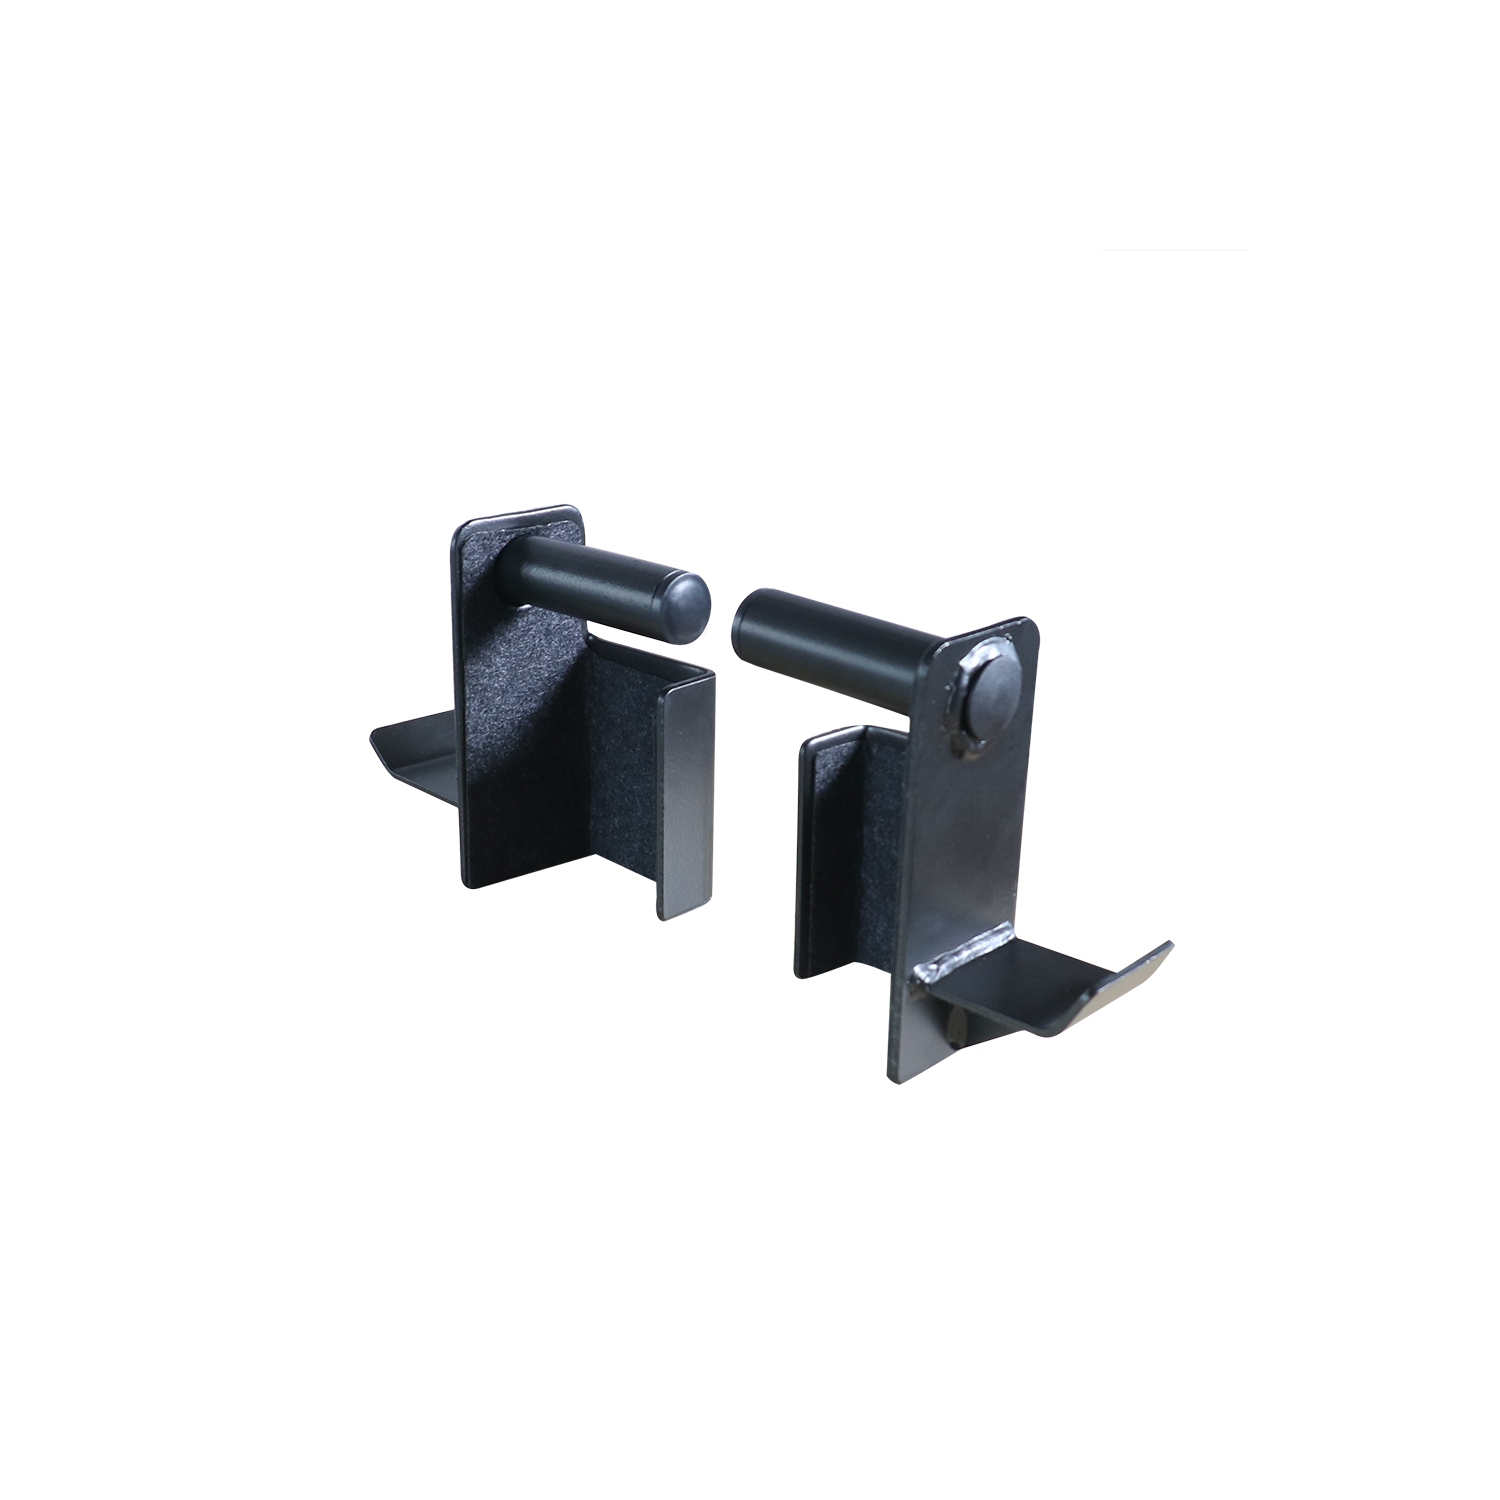 PRISP J-Hooks For Power Cage - Compatible with 2.5 x 2.5 Inch Racks, Sold in Pairs